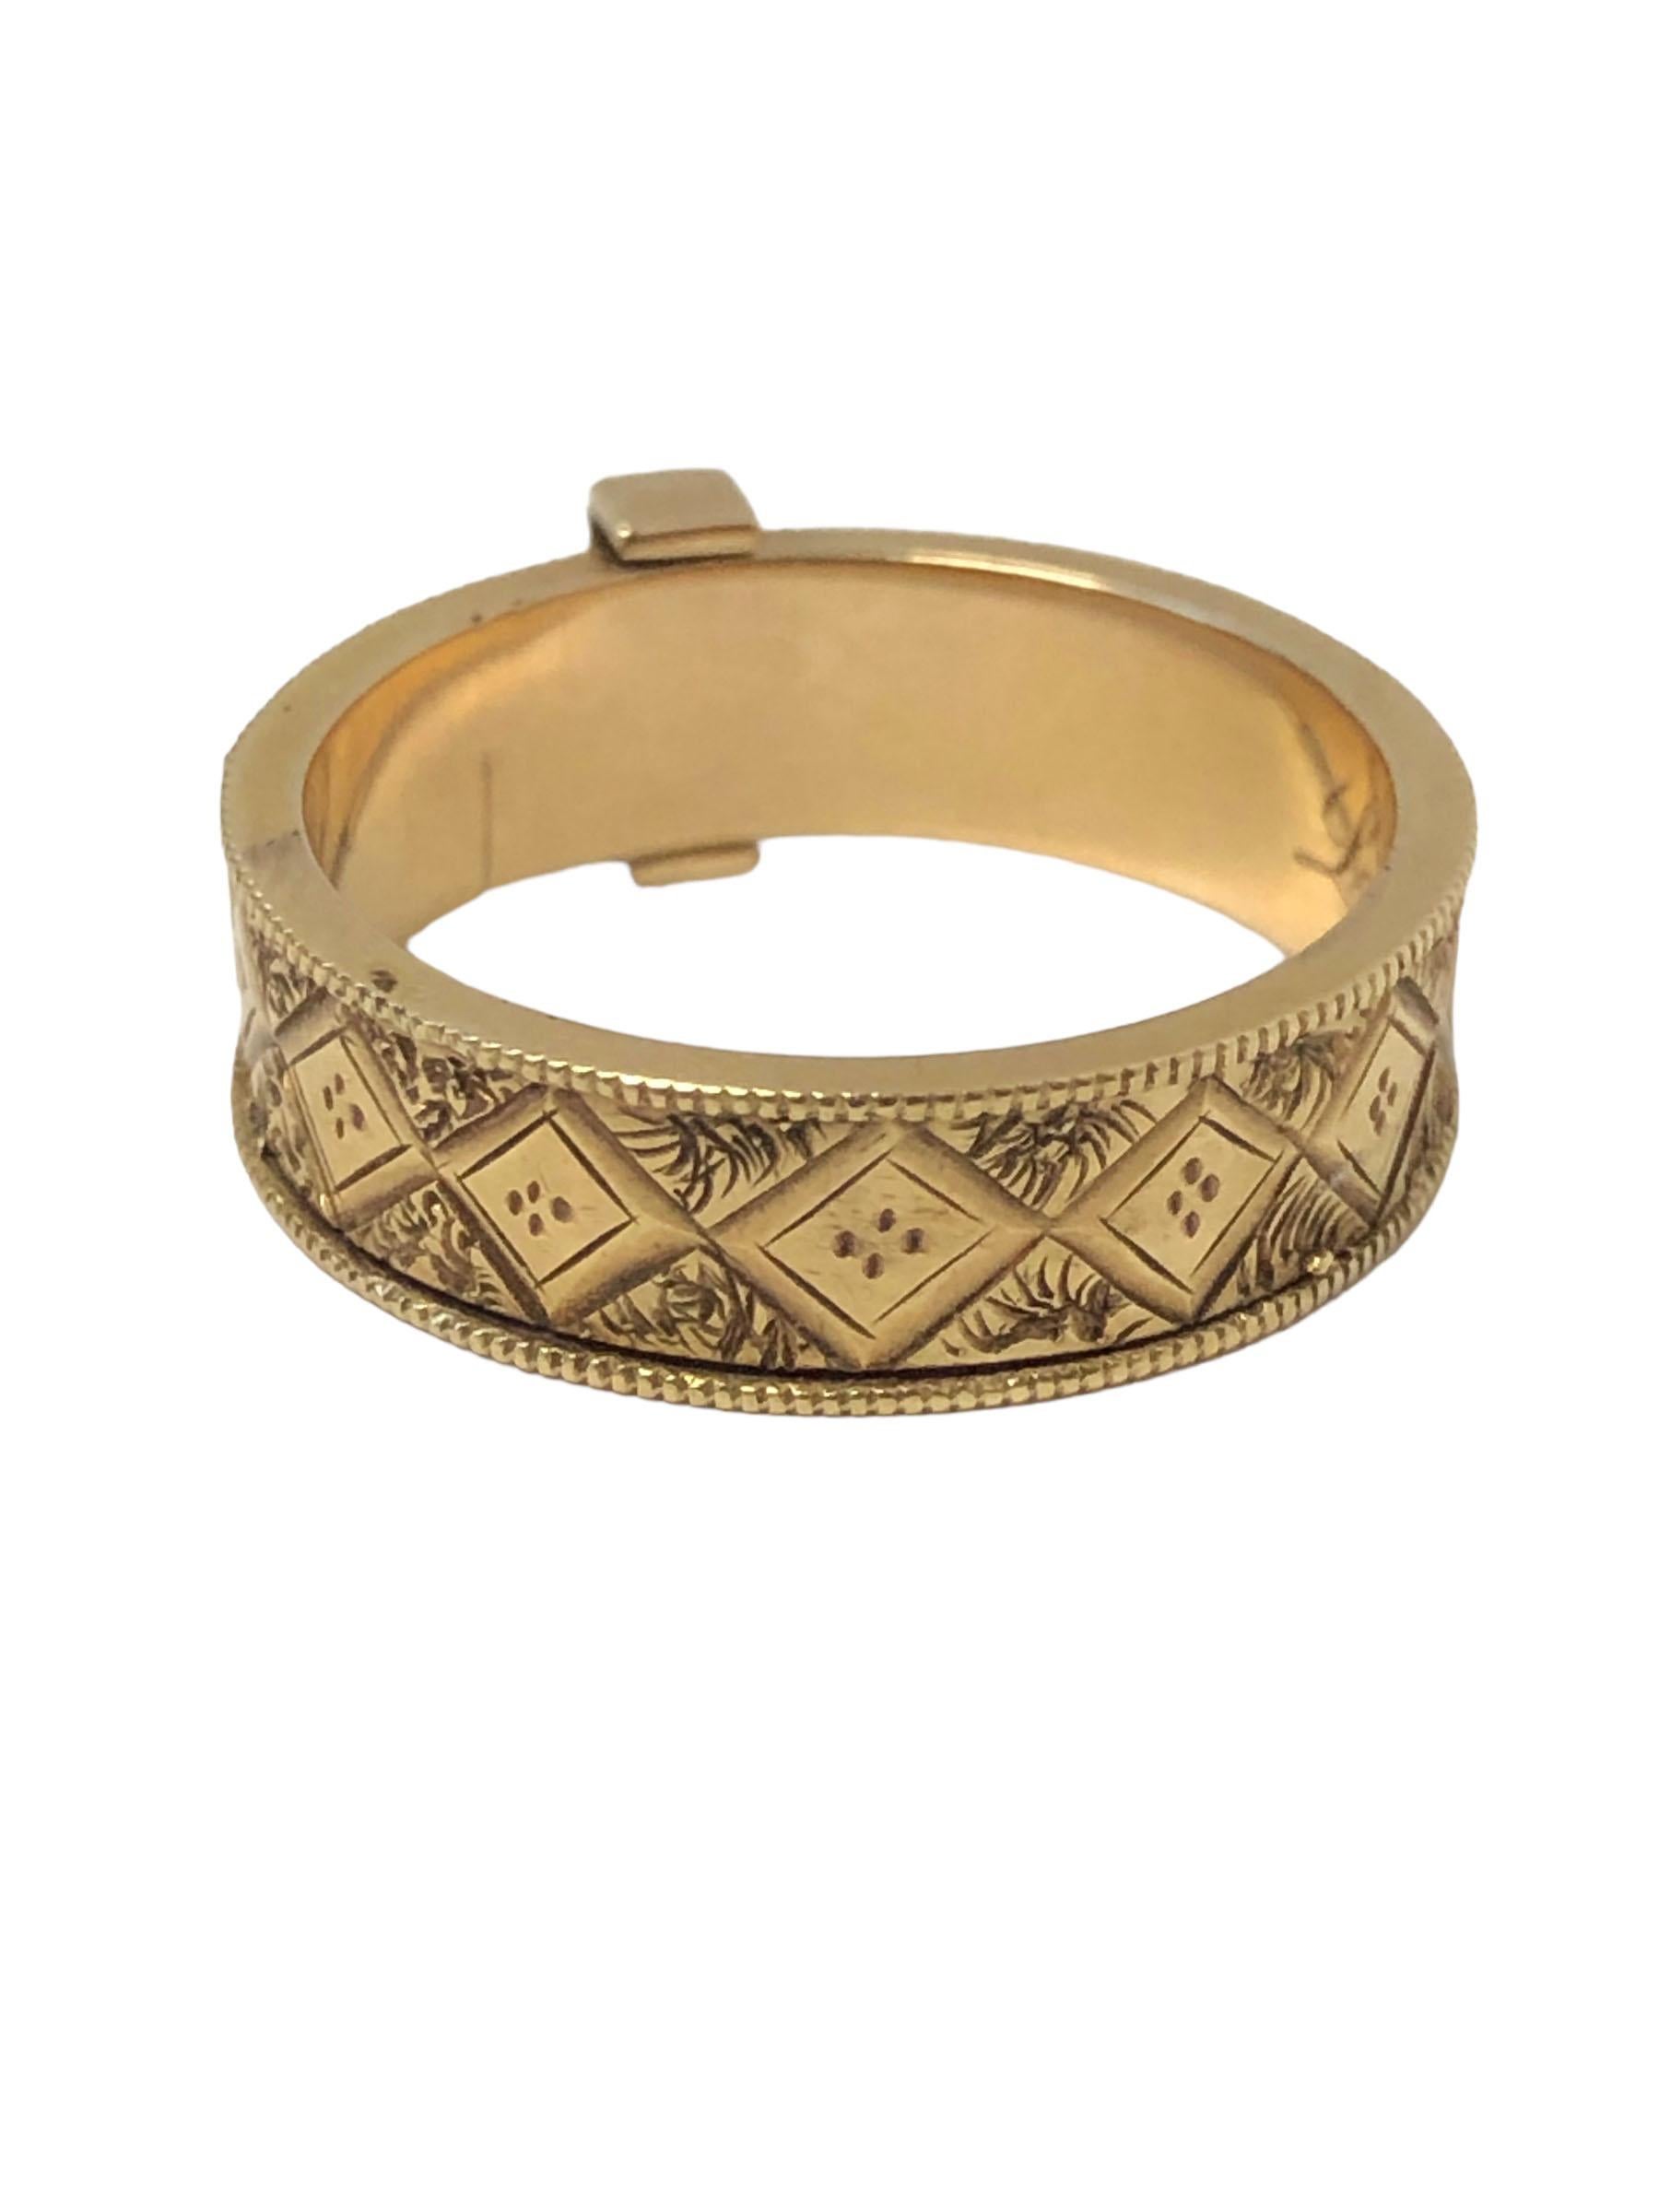 Antique Victorian Gold Buckle Form Mourning Memento Ring In Excellent Condition For Sale In Chicago, IL